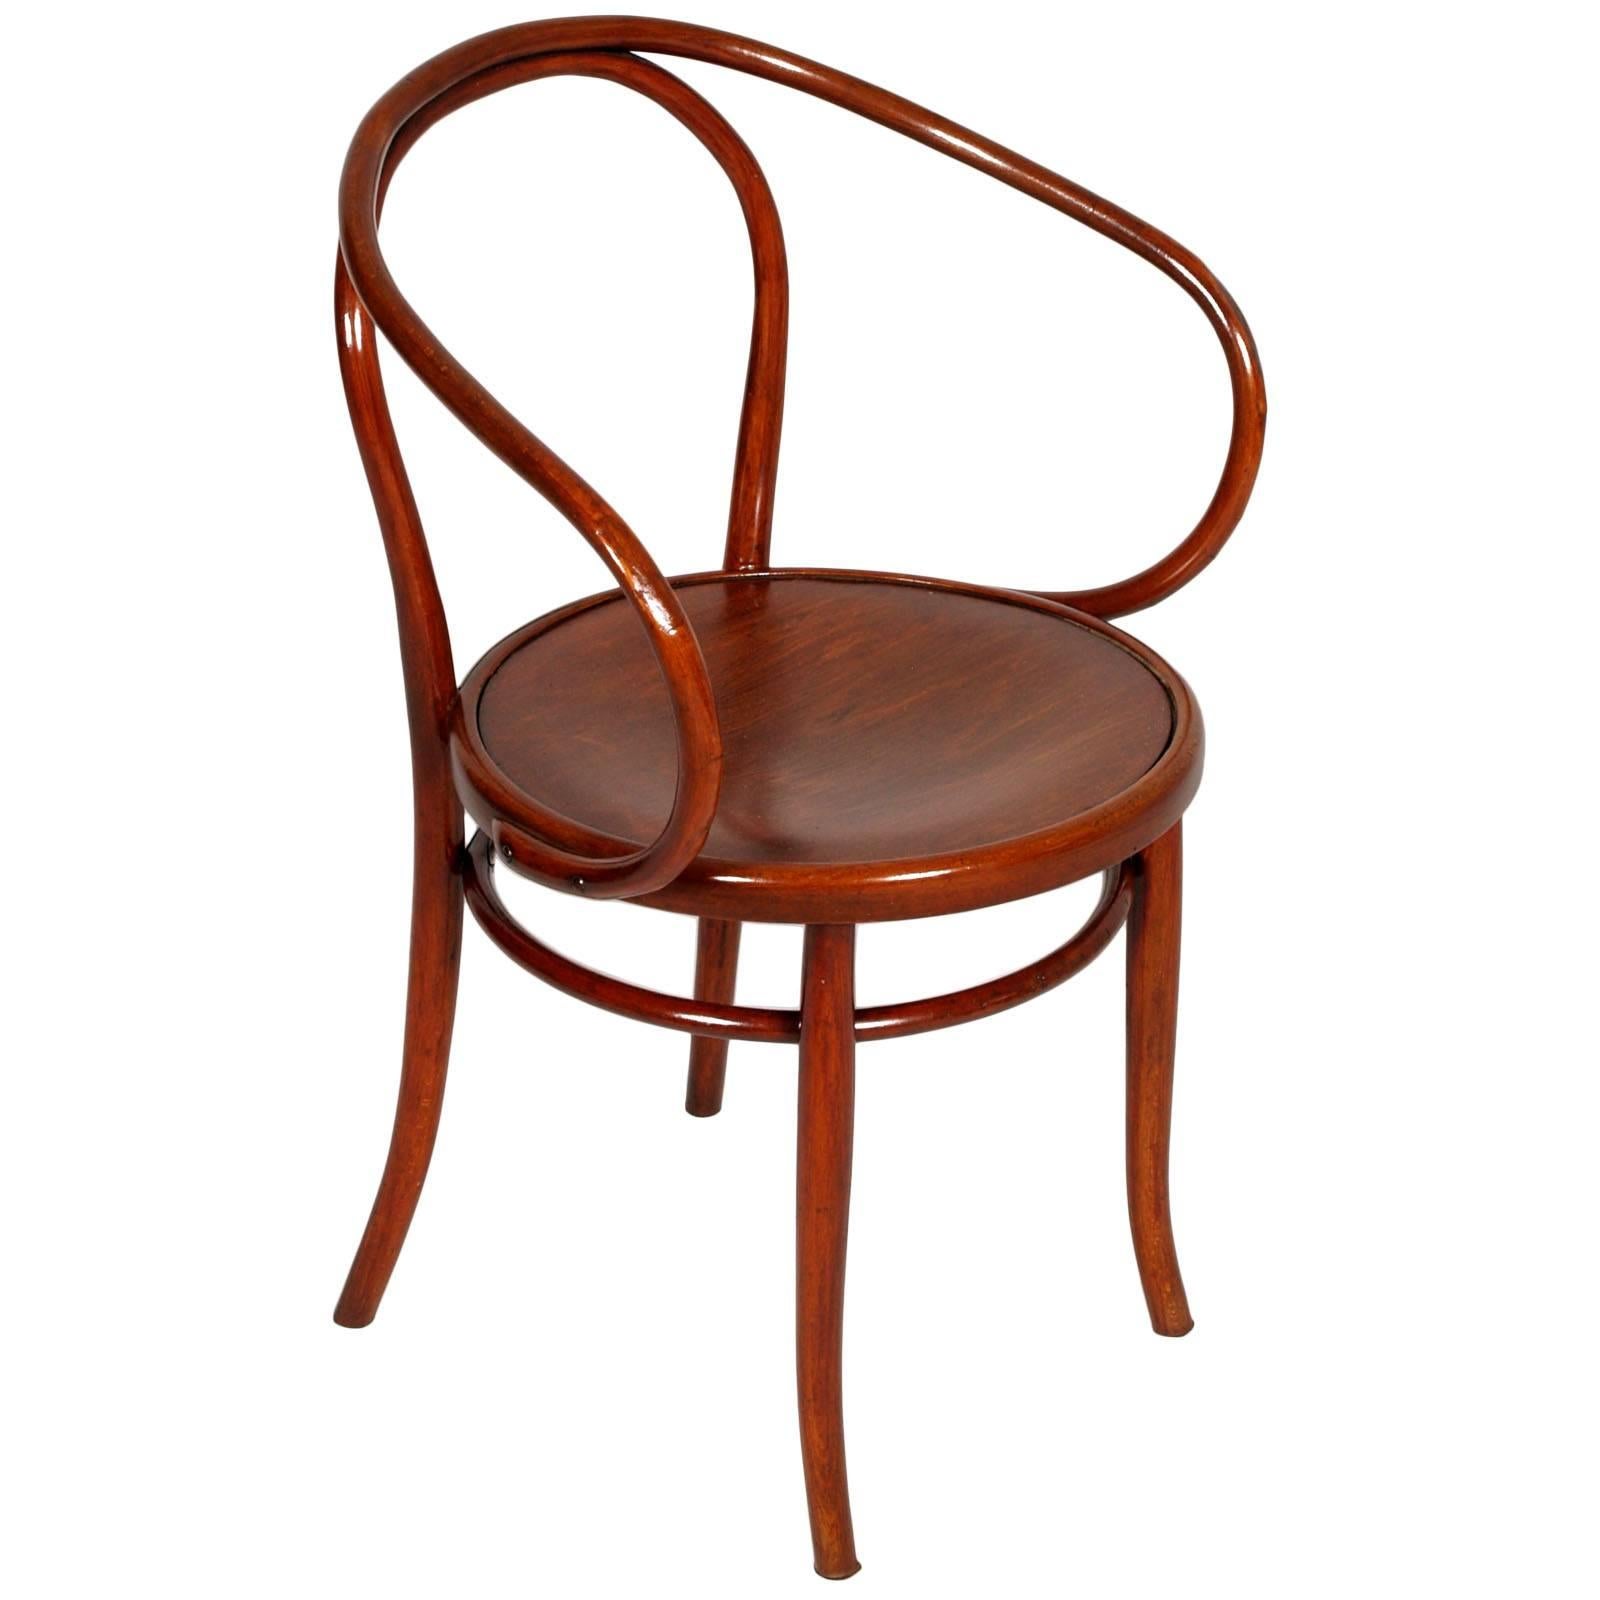 An Austrian (Vienna) pair of bentwood B-9 armchairs by Jacob and Josef Kohn circa 1870. An original iconic chair. This is the favourite chair of architects especially from 